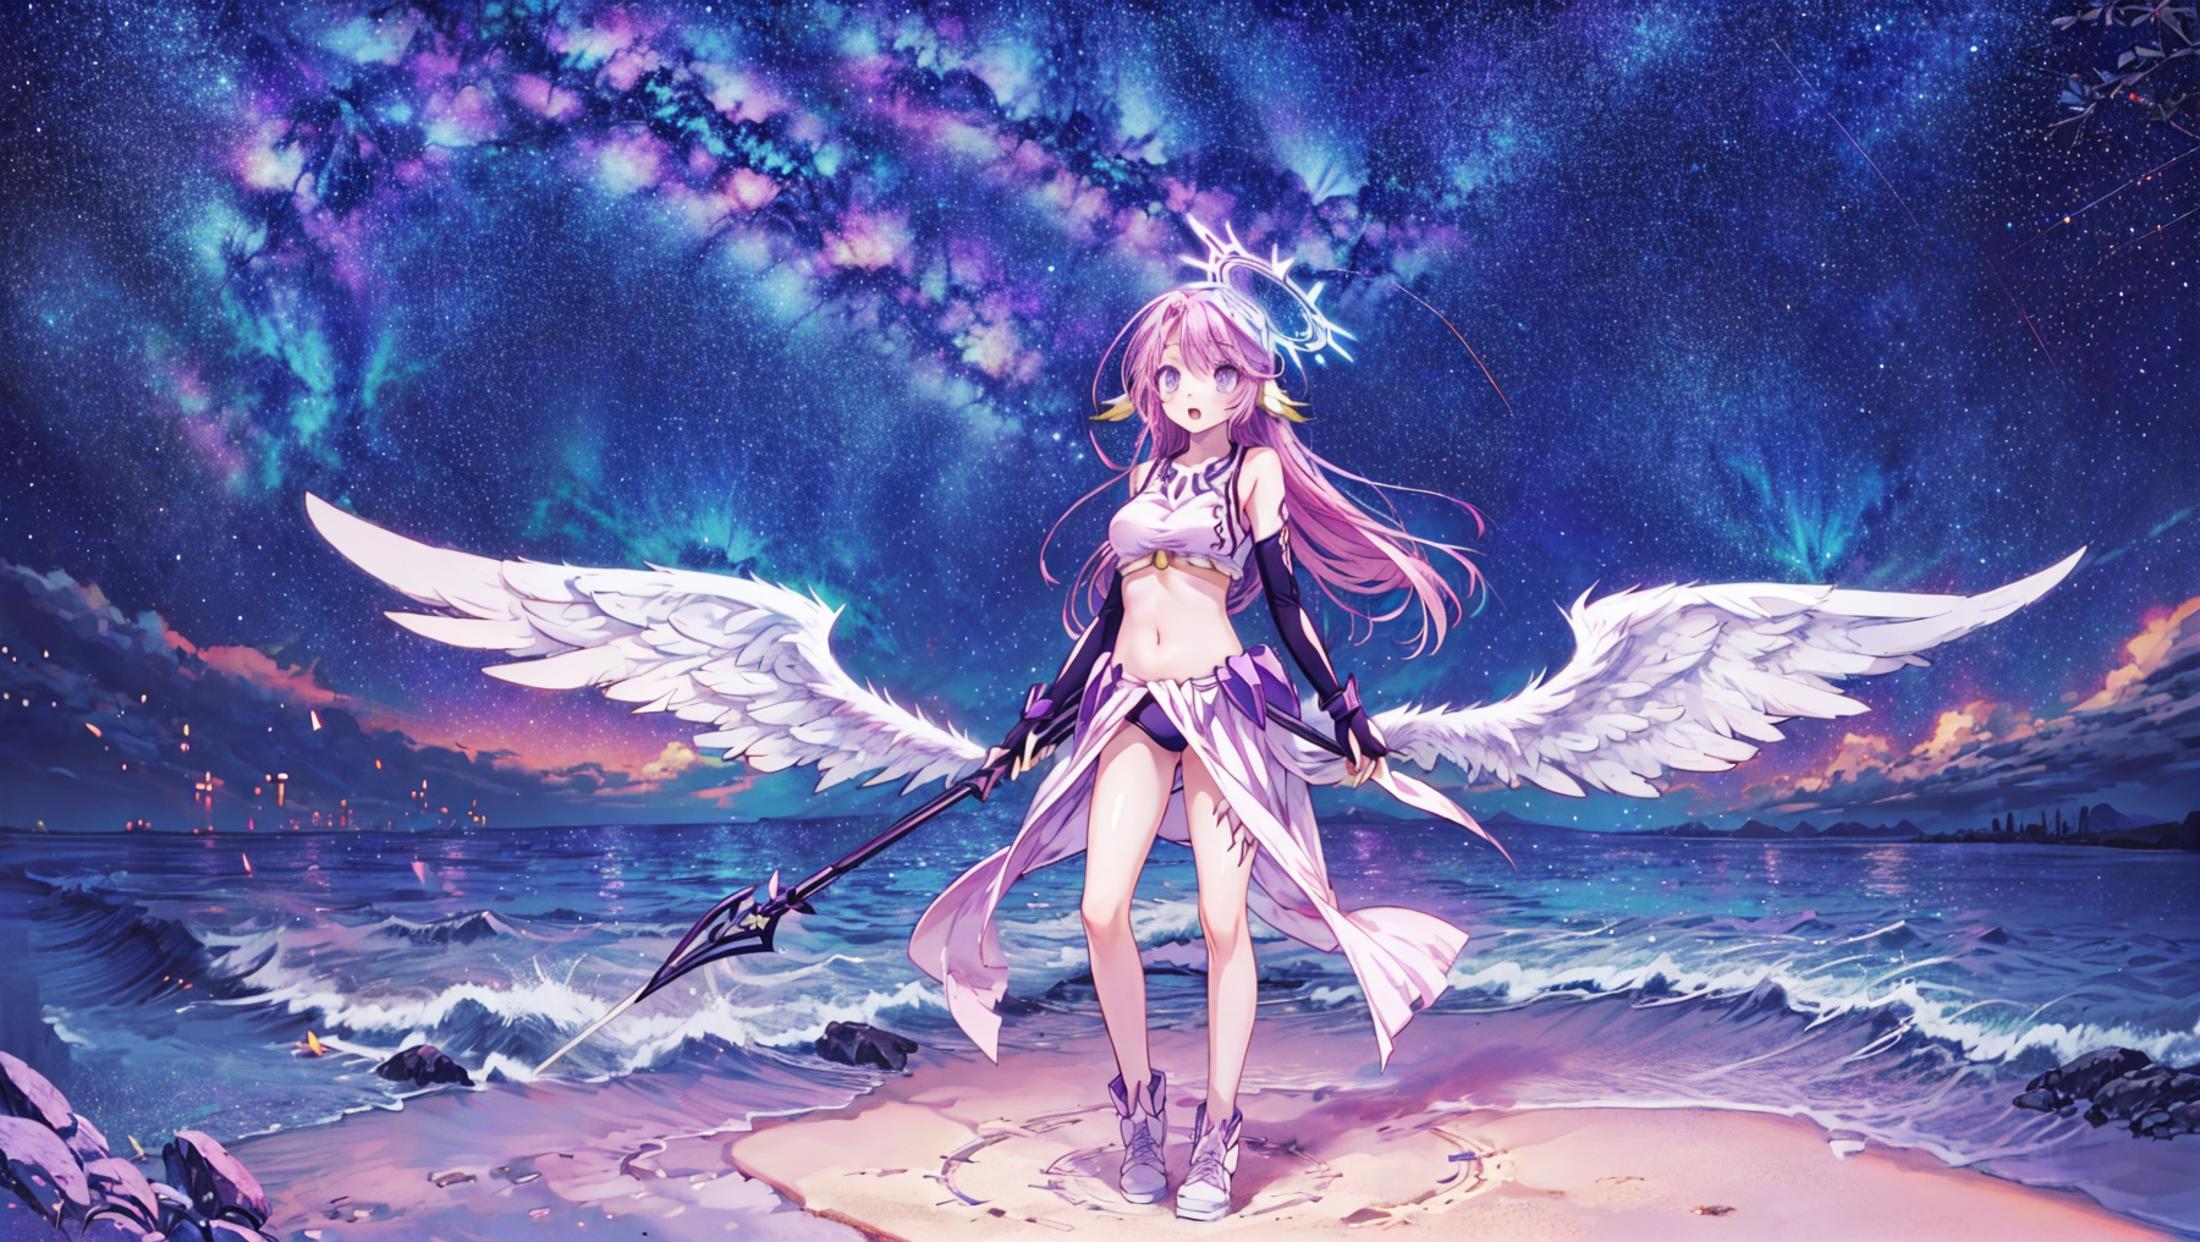 Jibril (No Game No Life) image by hhelmut703